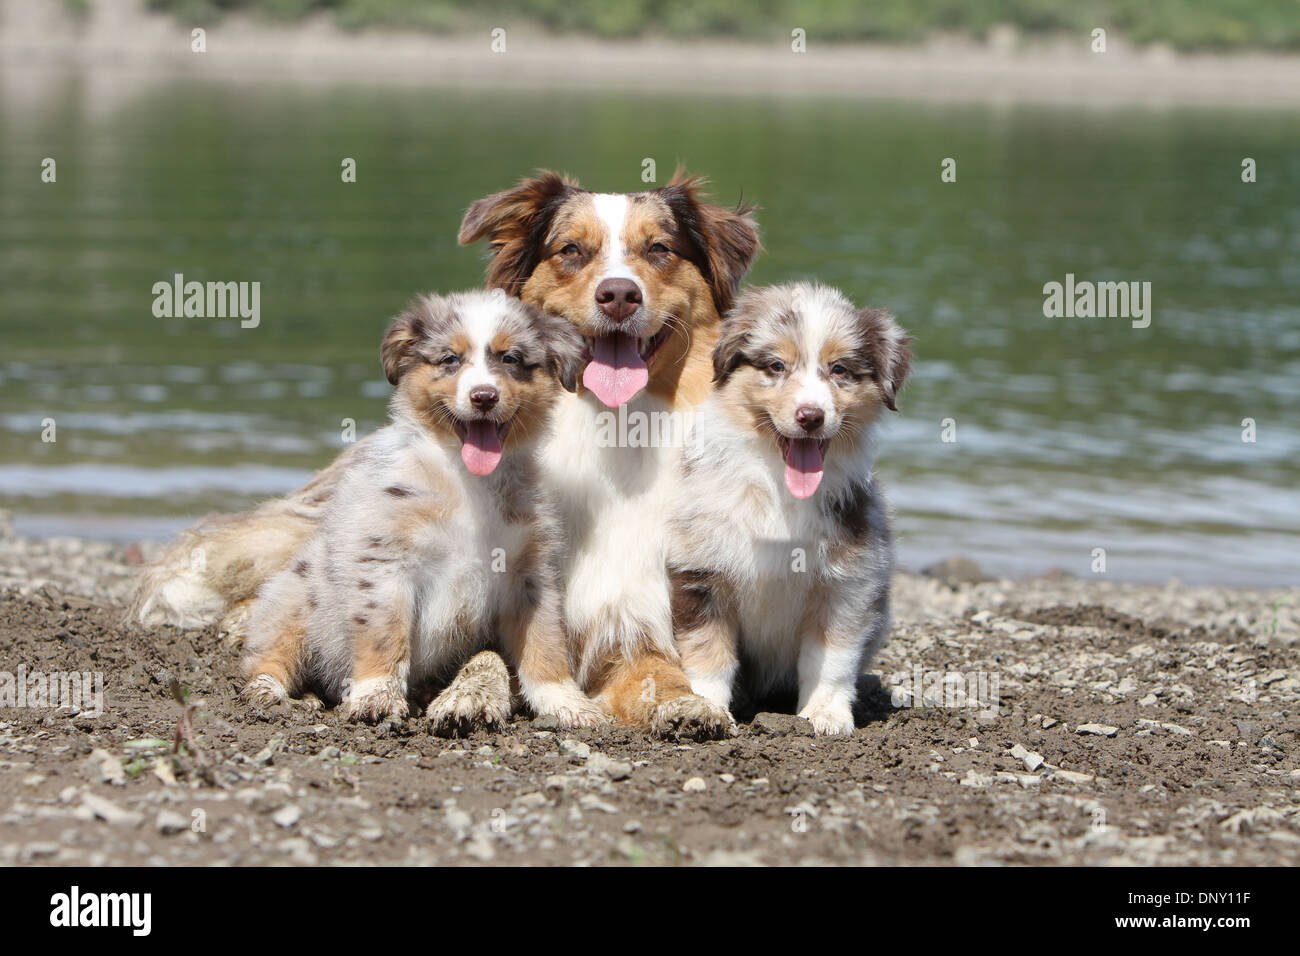 Dog Australian shepherd / Aussie  adult and two puppies (red merle) at the edge of a lake Stock Photo